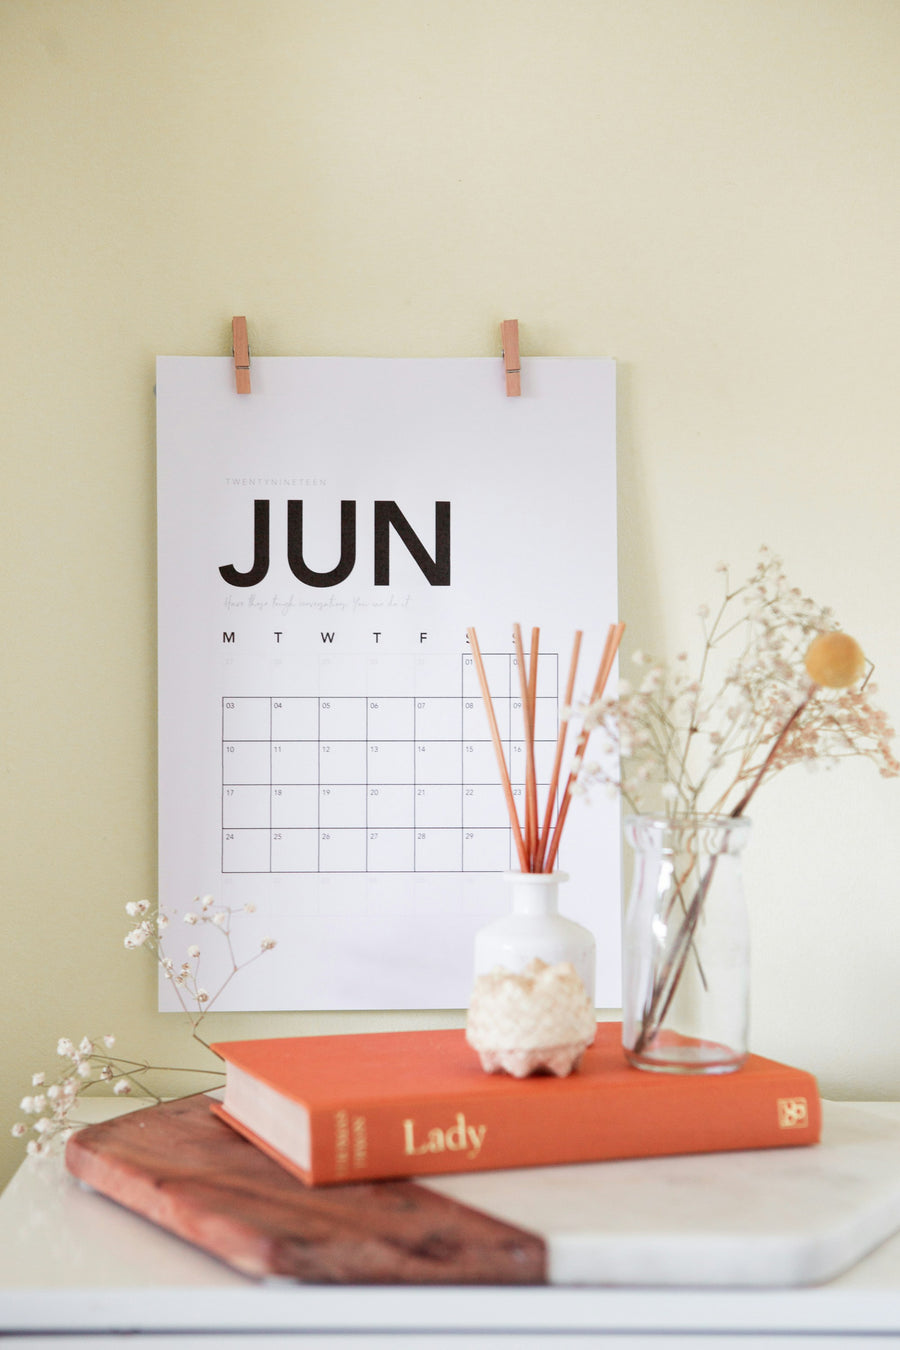 Managing Allergies In June Symptoms, Triggers, And Prevention Strategies